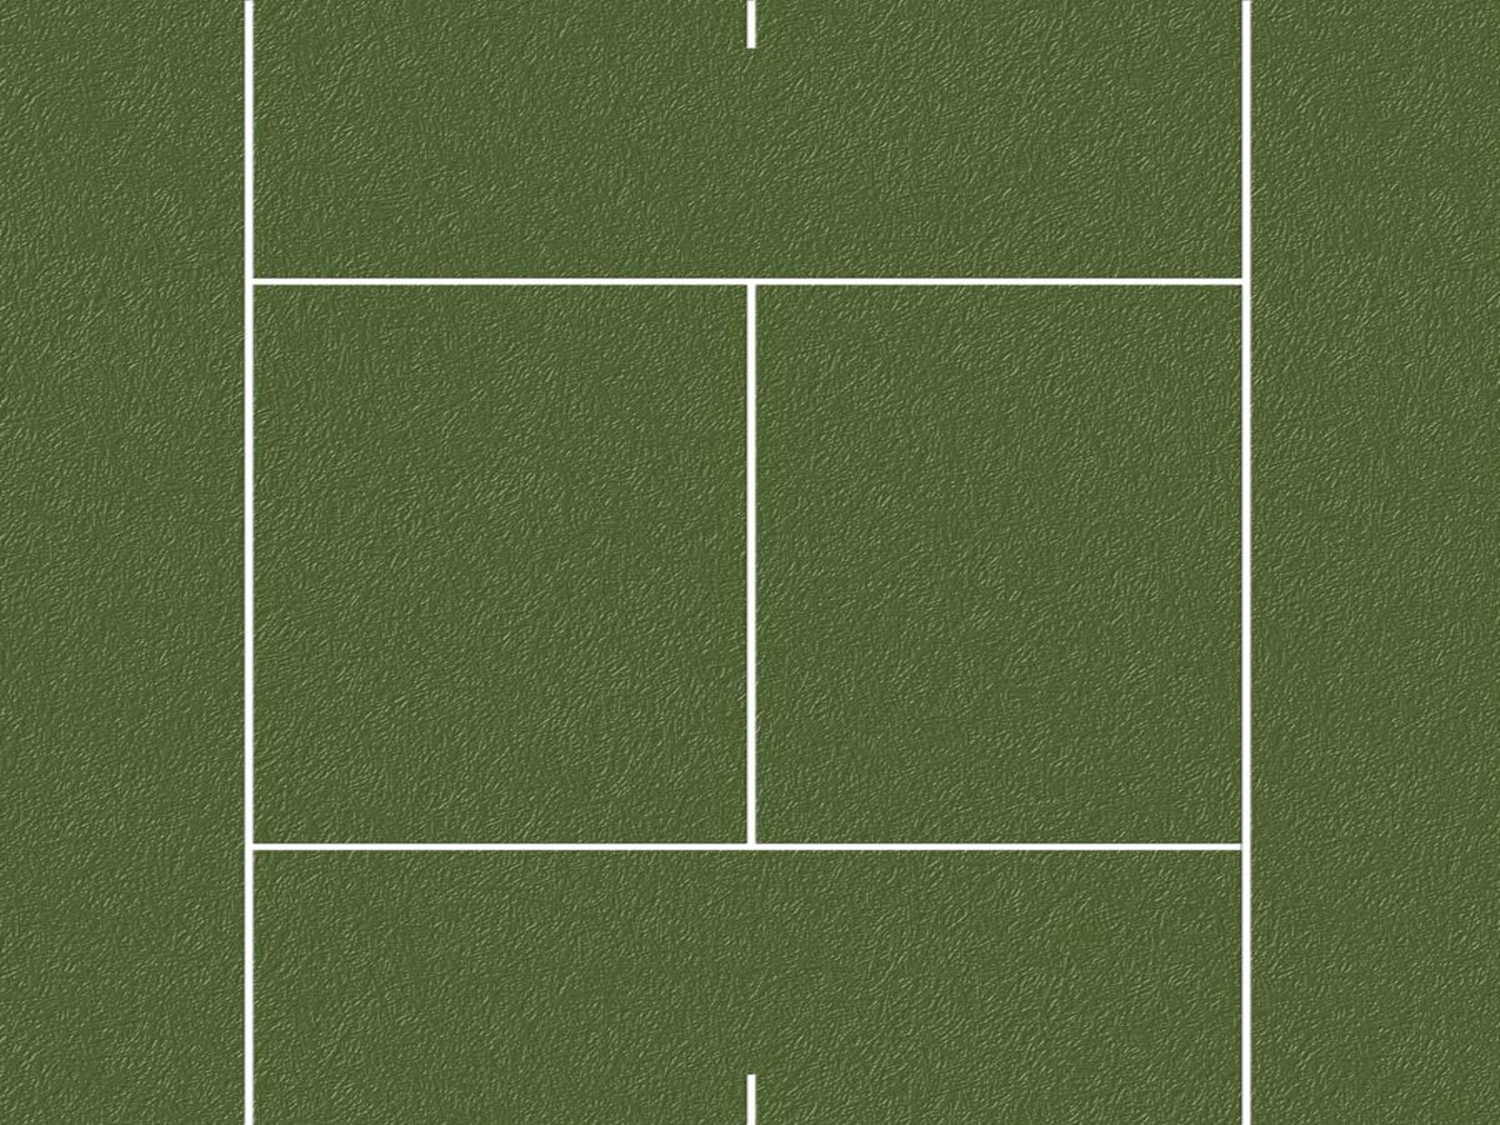 Tennis Court Background Powerpoint Template Ppt Design Slide By